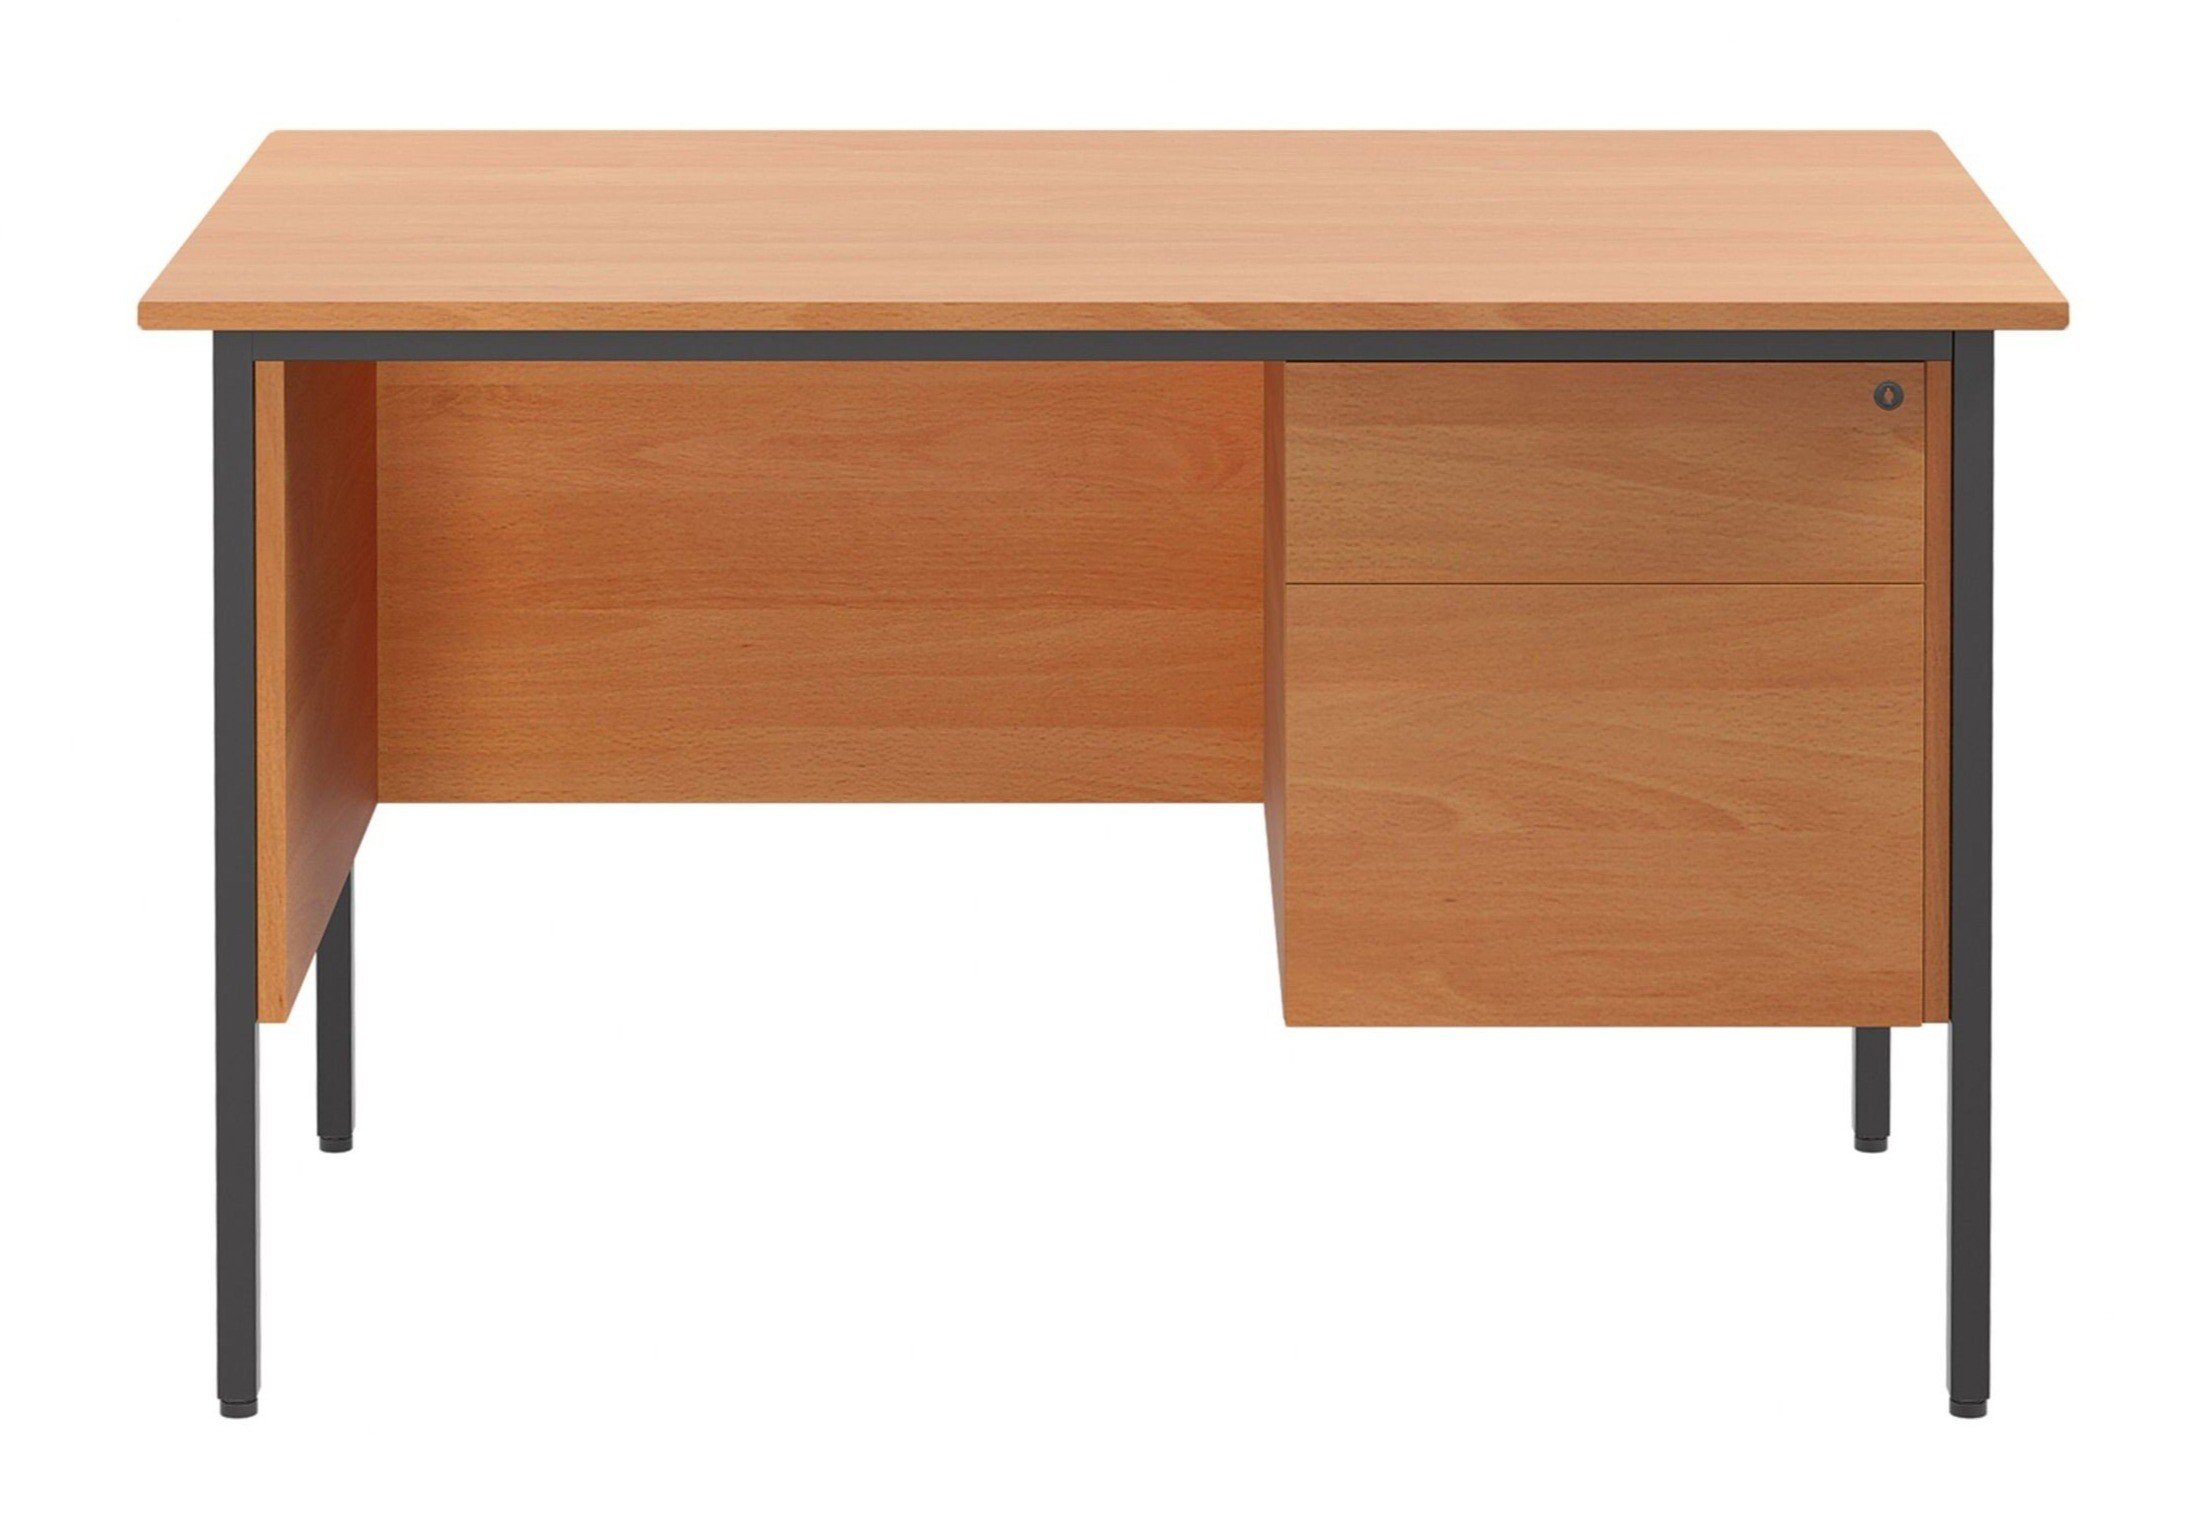 TC Eco 18 Rectangular Desk with 2 Drawer Pedestal in 3 Finishes ...